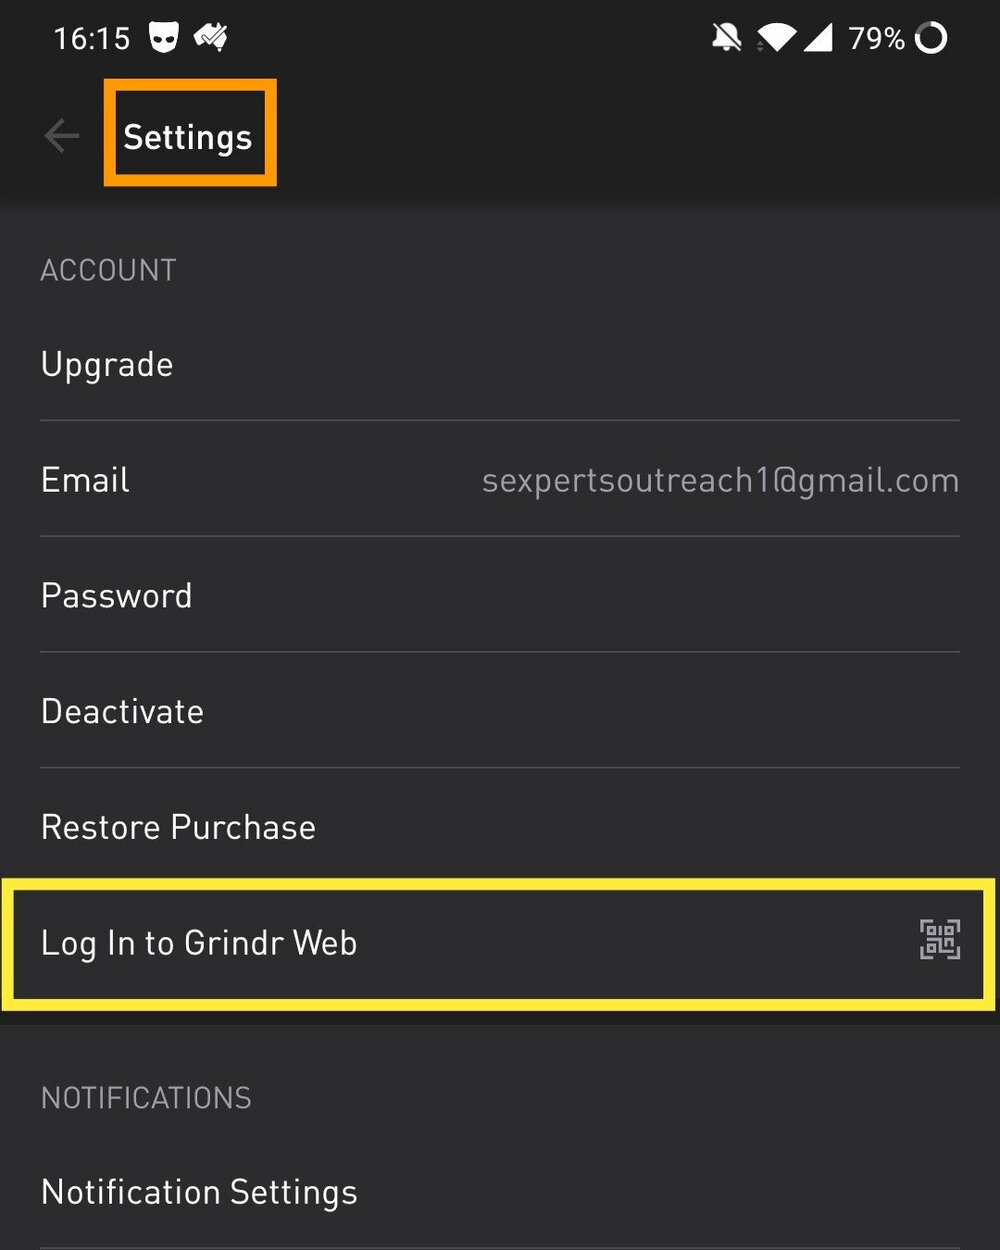 How does grindr web work?